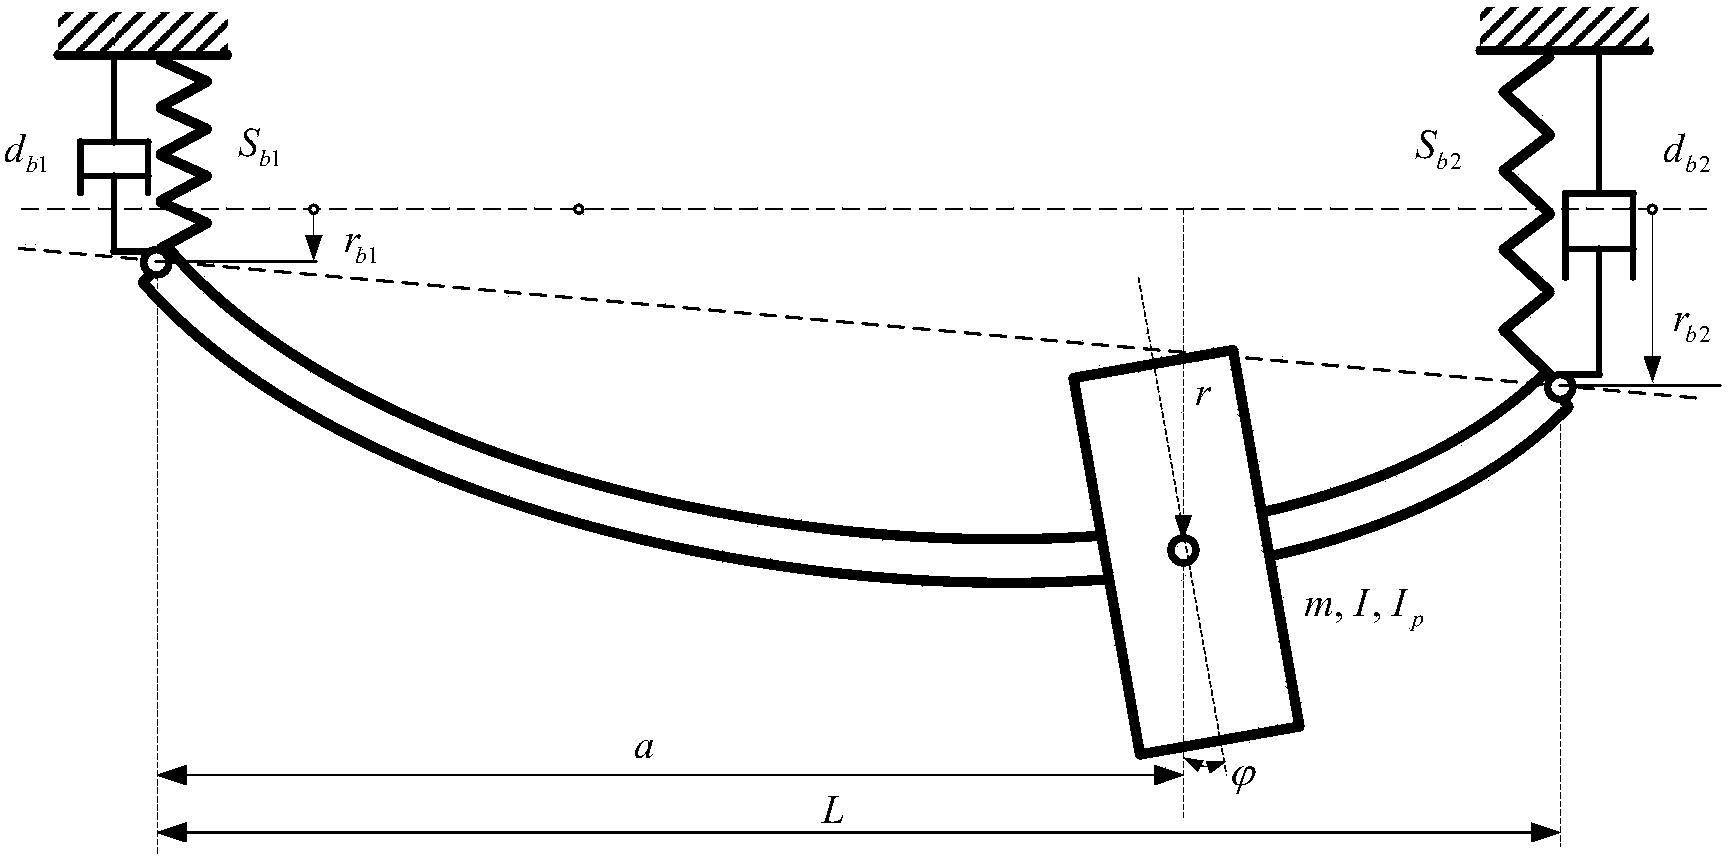 Structural dynamics design method of rotor of aerial engine